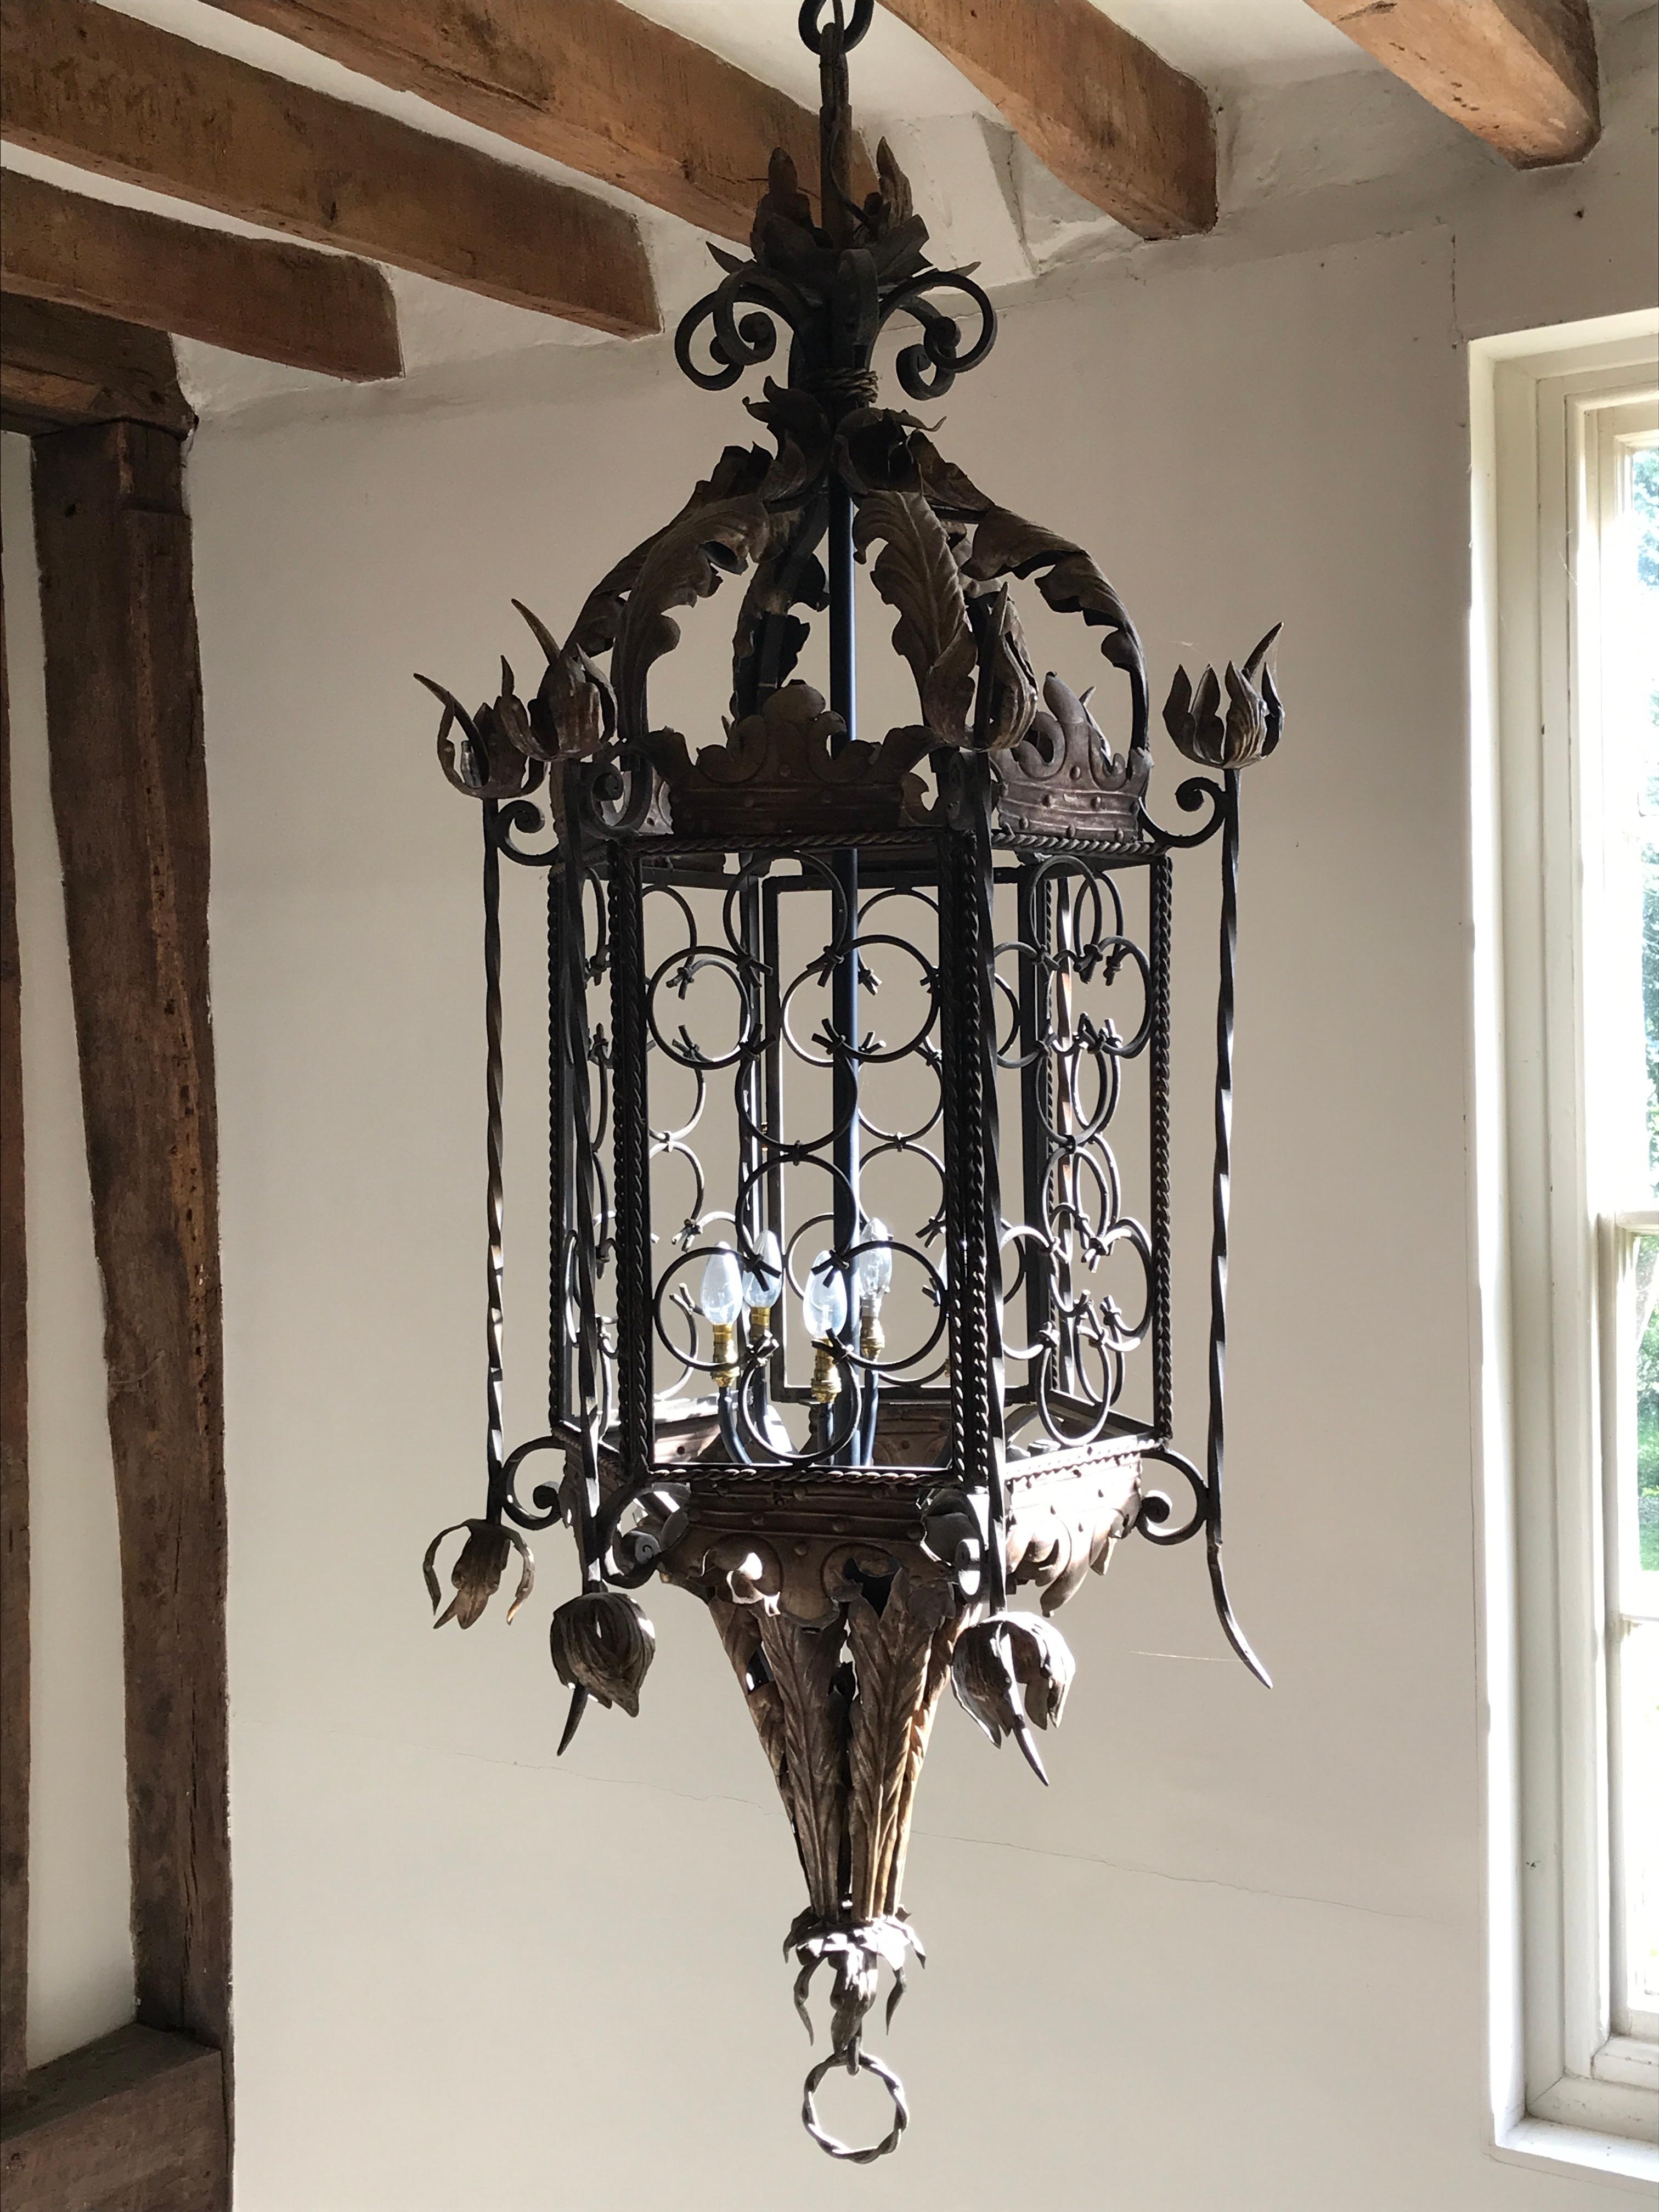 Exceptional and massive, 18th century, Spanish iron and brass, octagonal lantern. 
Spanish metalwork is renowned for its quality and this magnificent lantern made for a nobleman exudes gravitas

- The six coronets around the top and the bottom